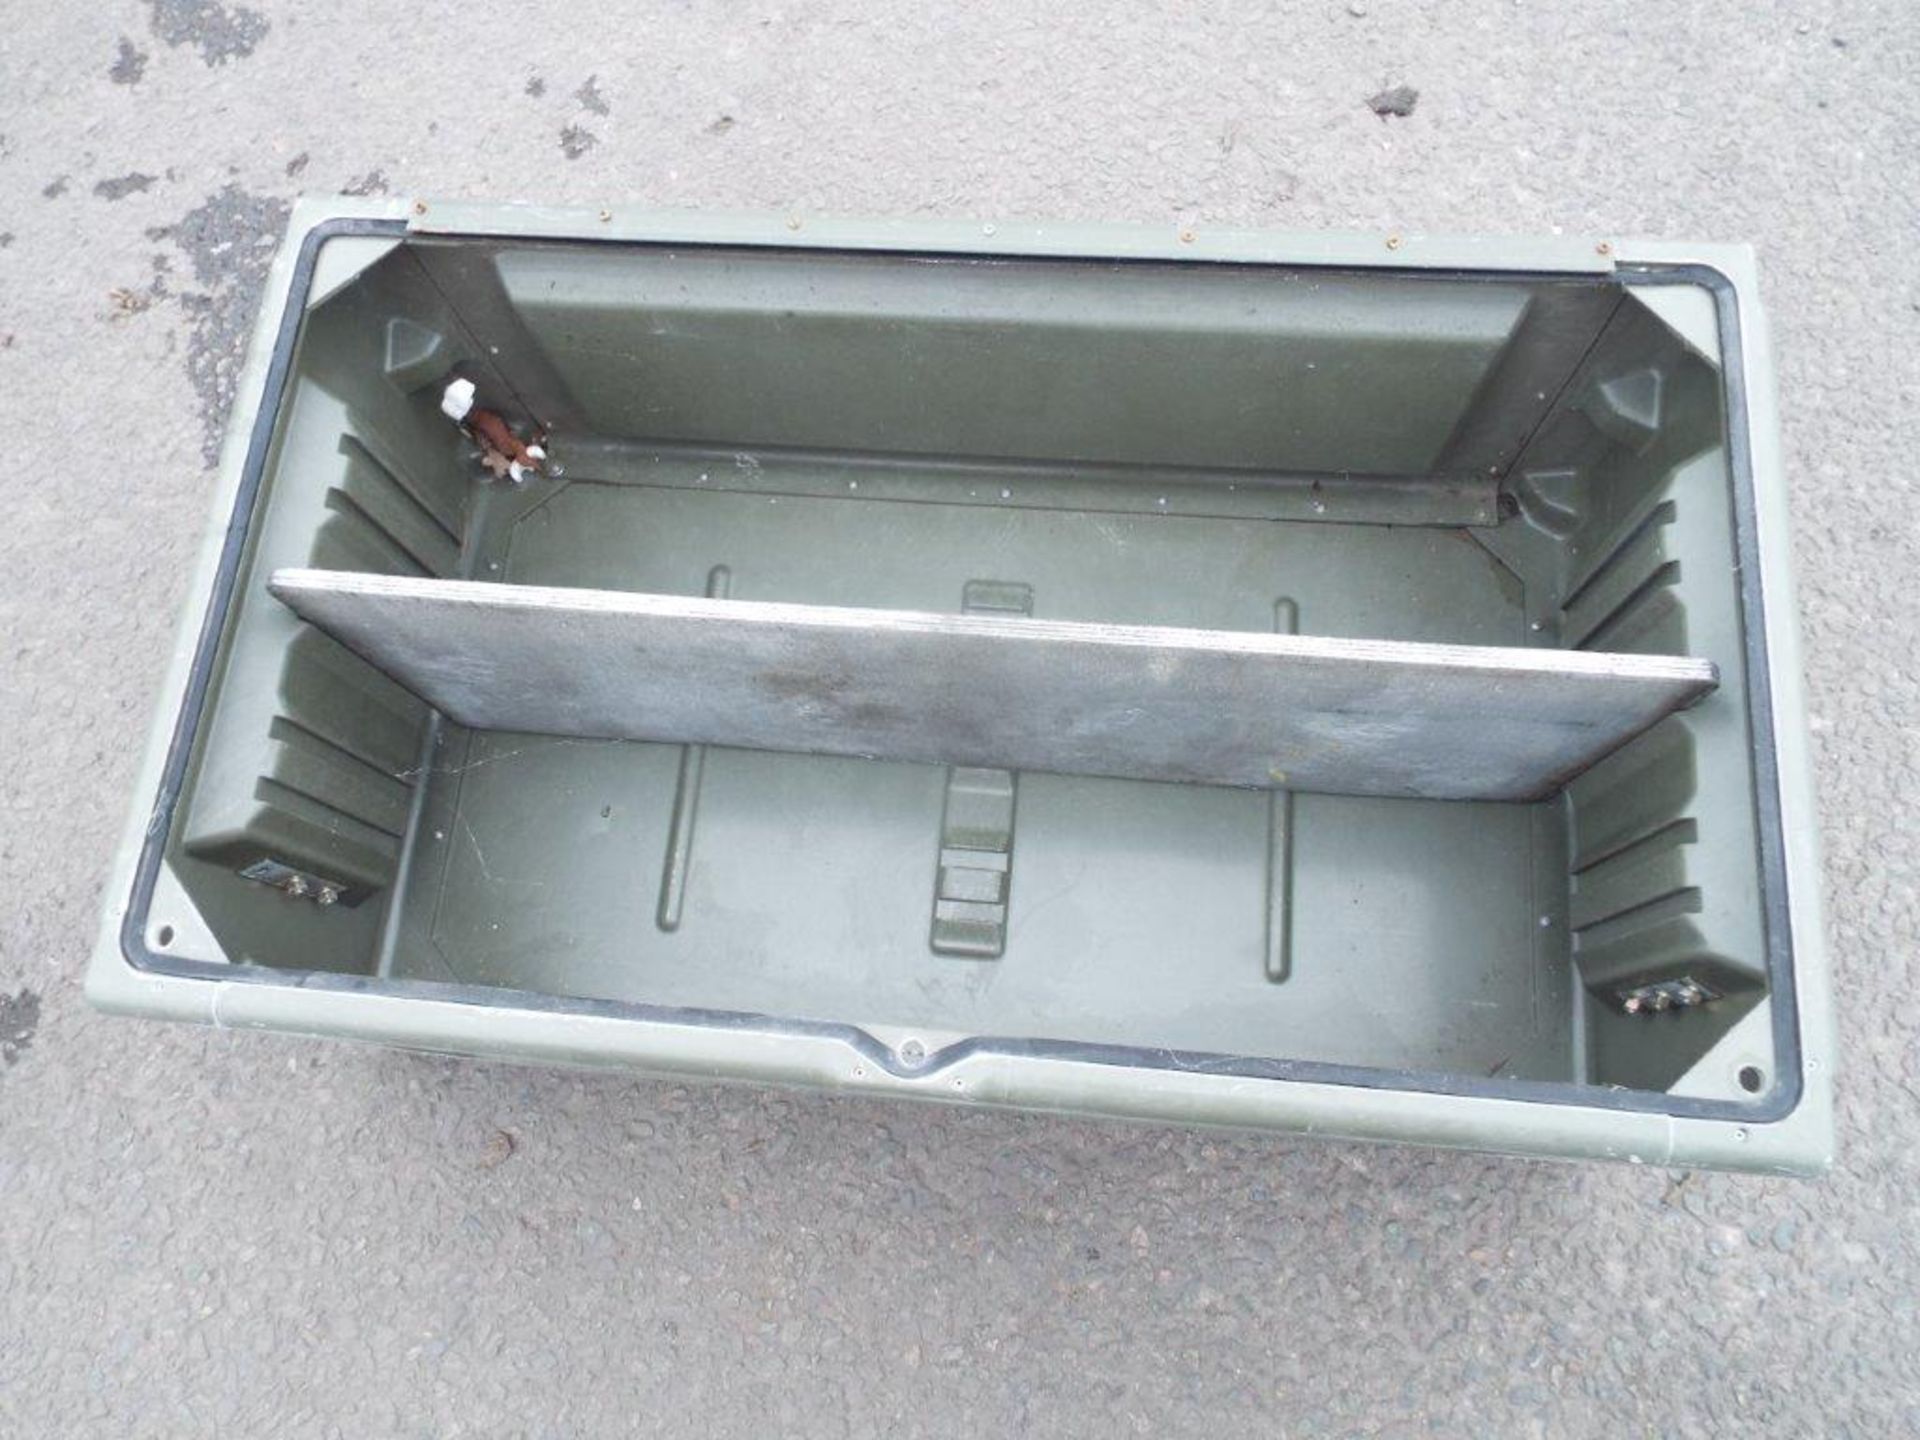 13 x Heavy Duty Interconnecting Storage Boxes with Lids - Image 7 of 8